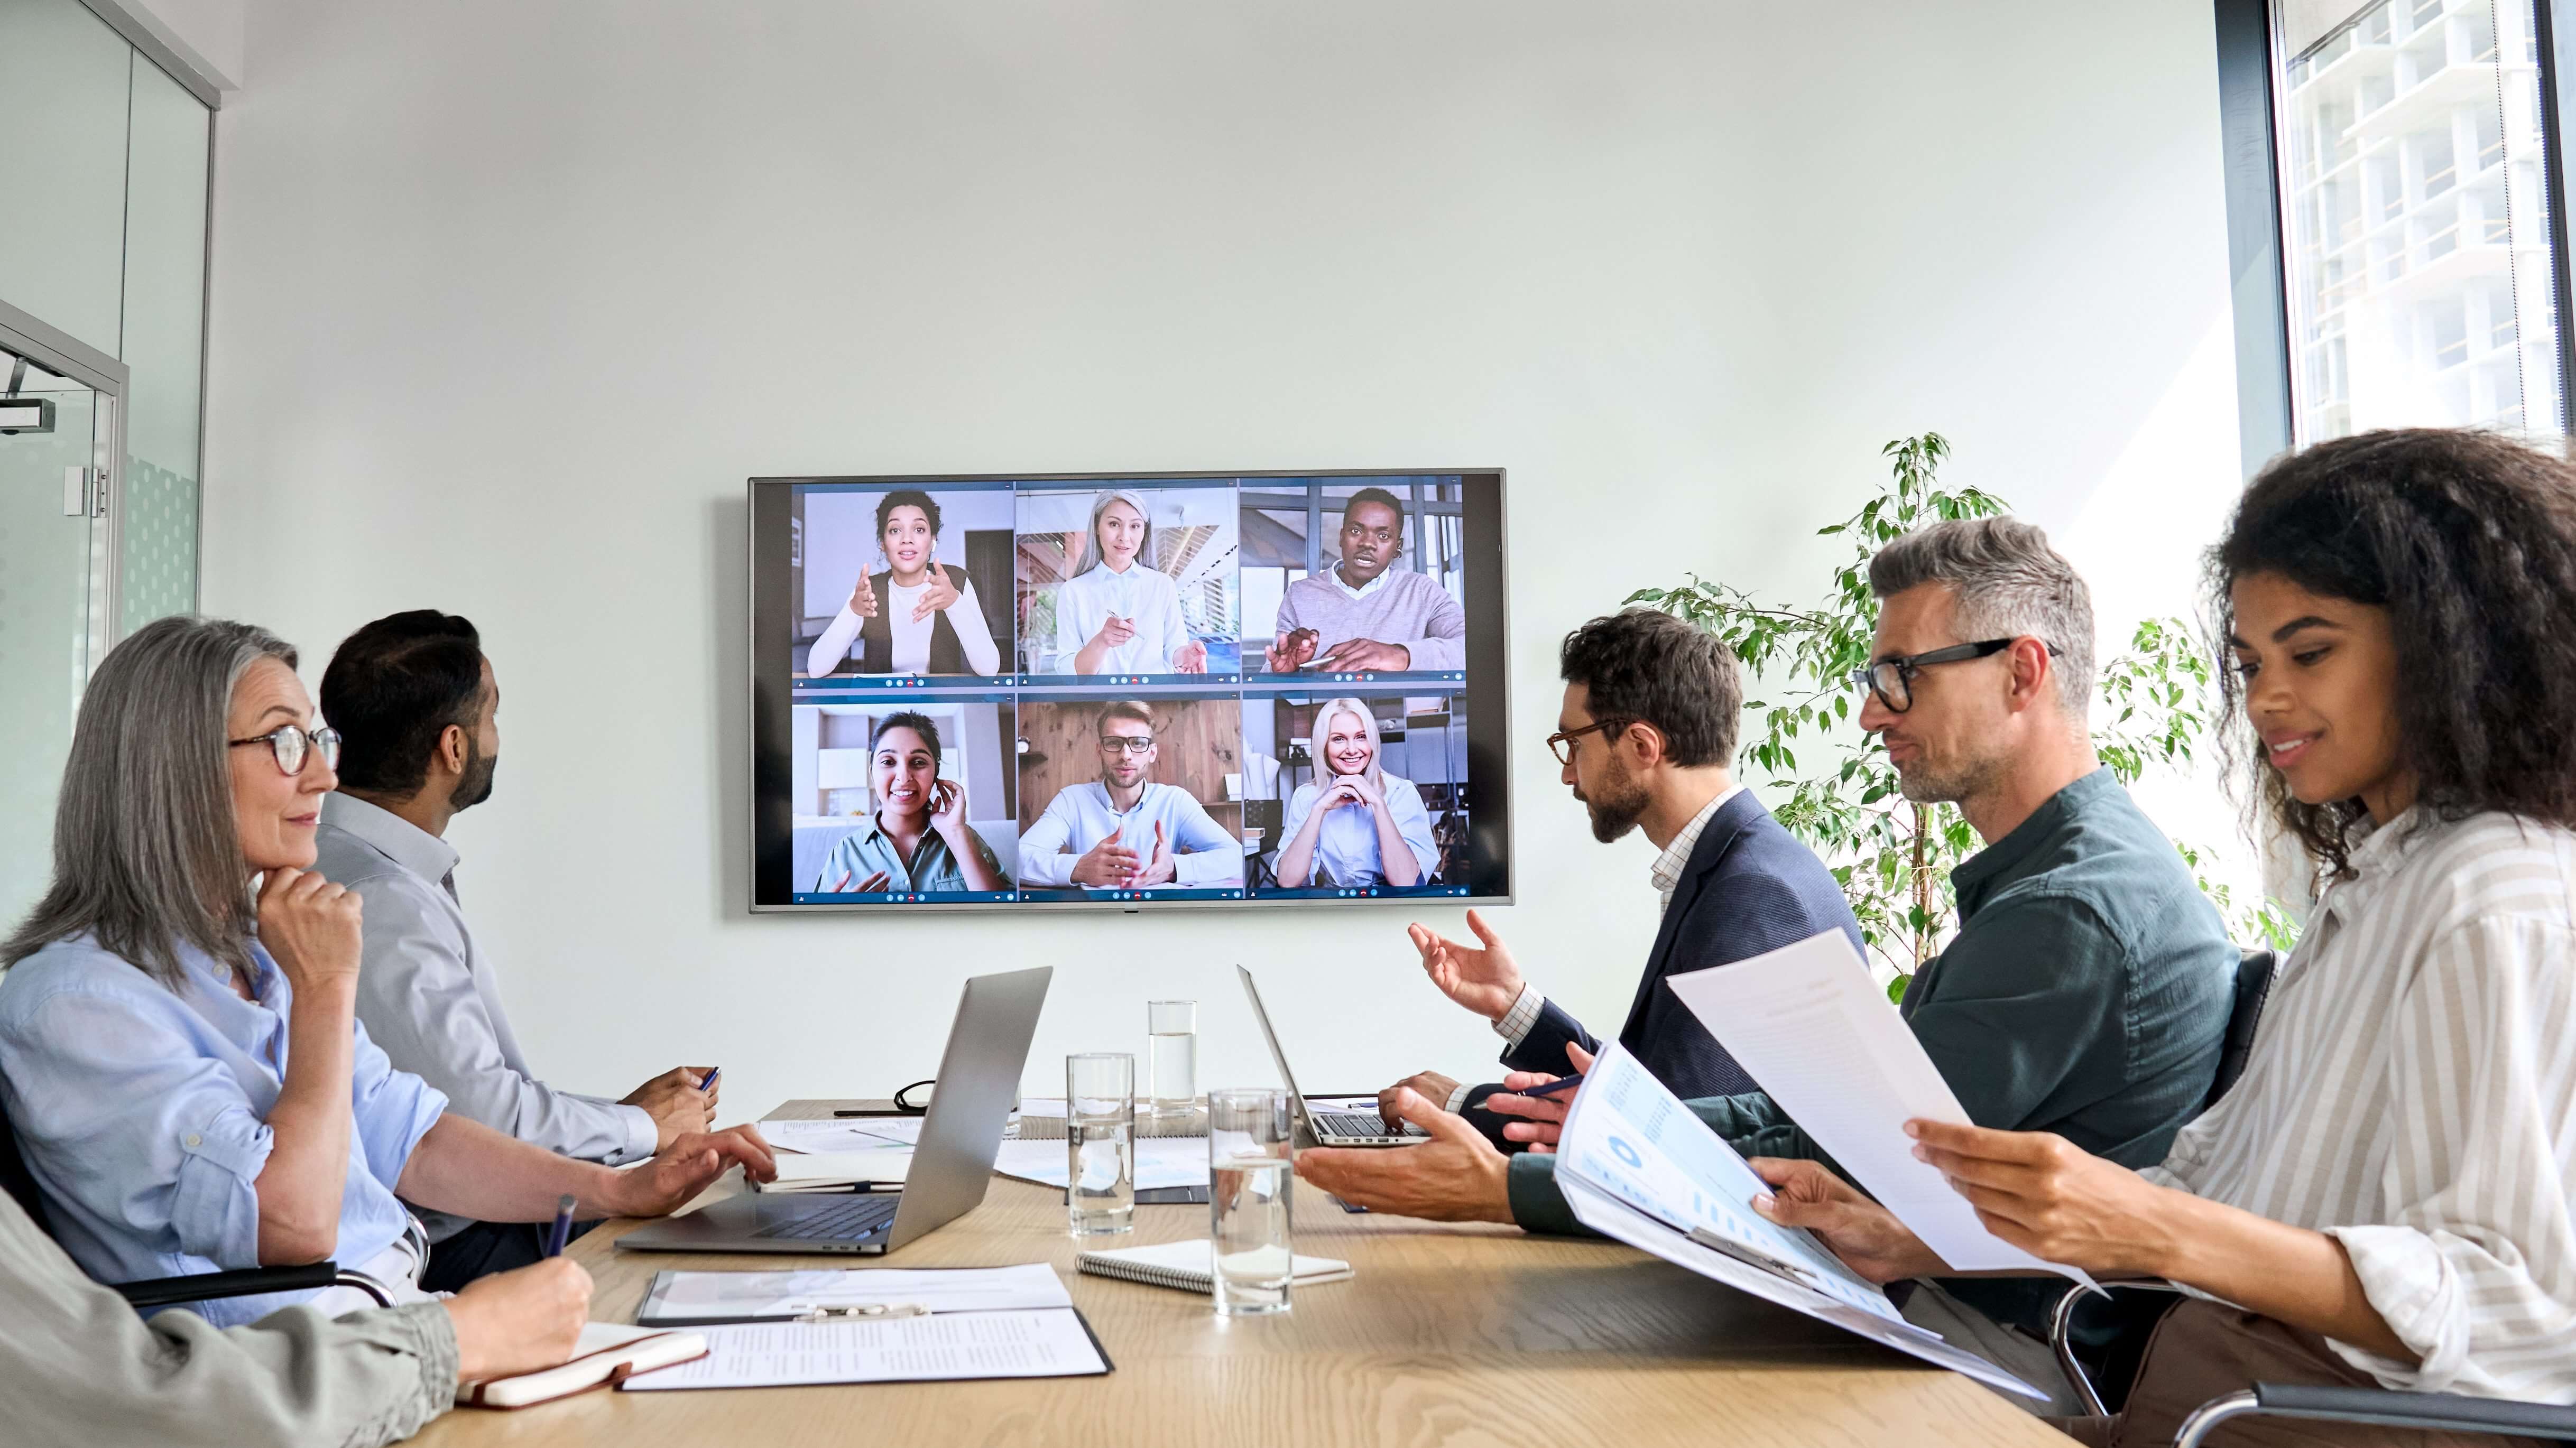 How To Use Digital Signage to Improve Corporate Communication With Staff